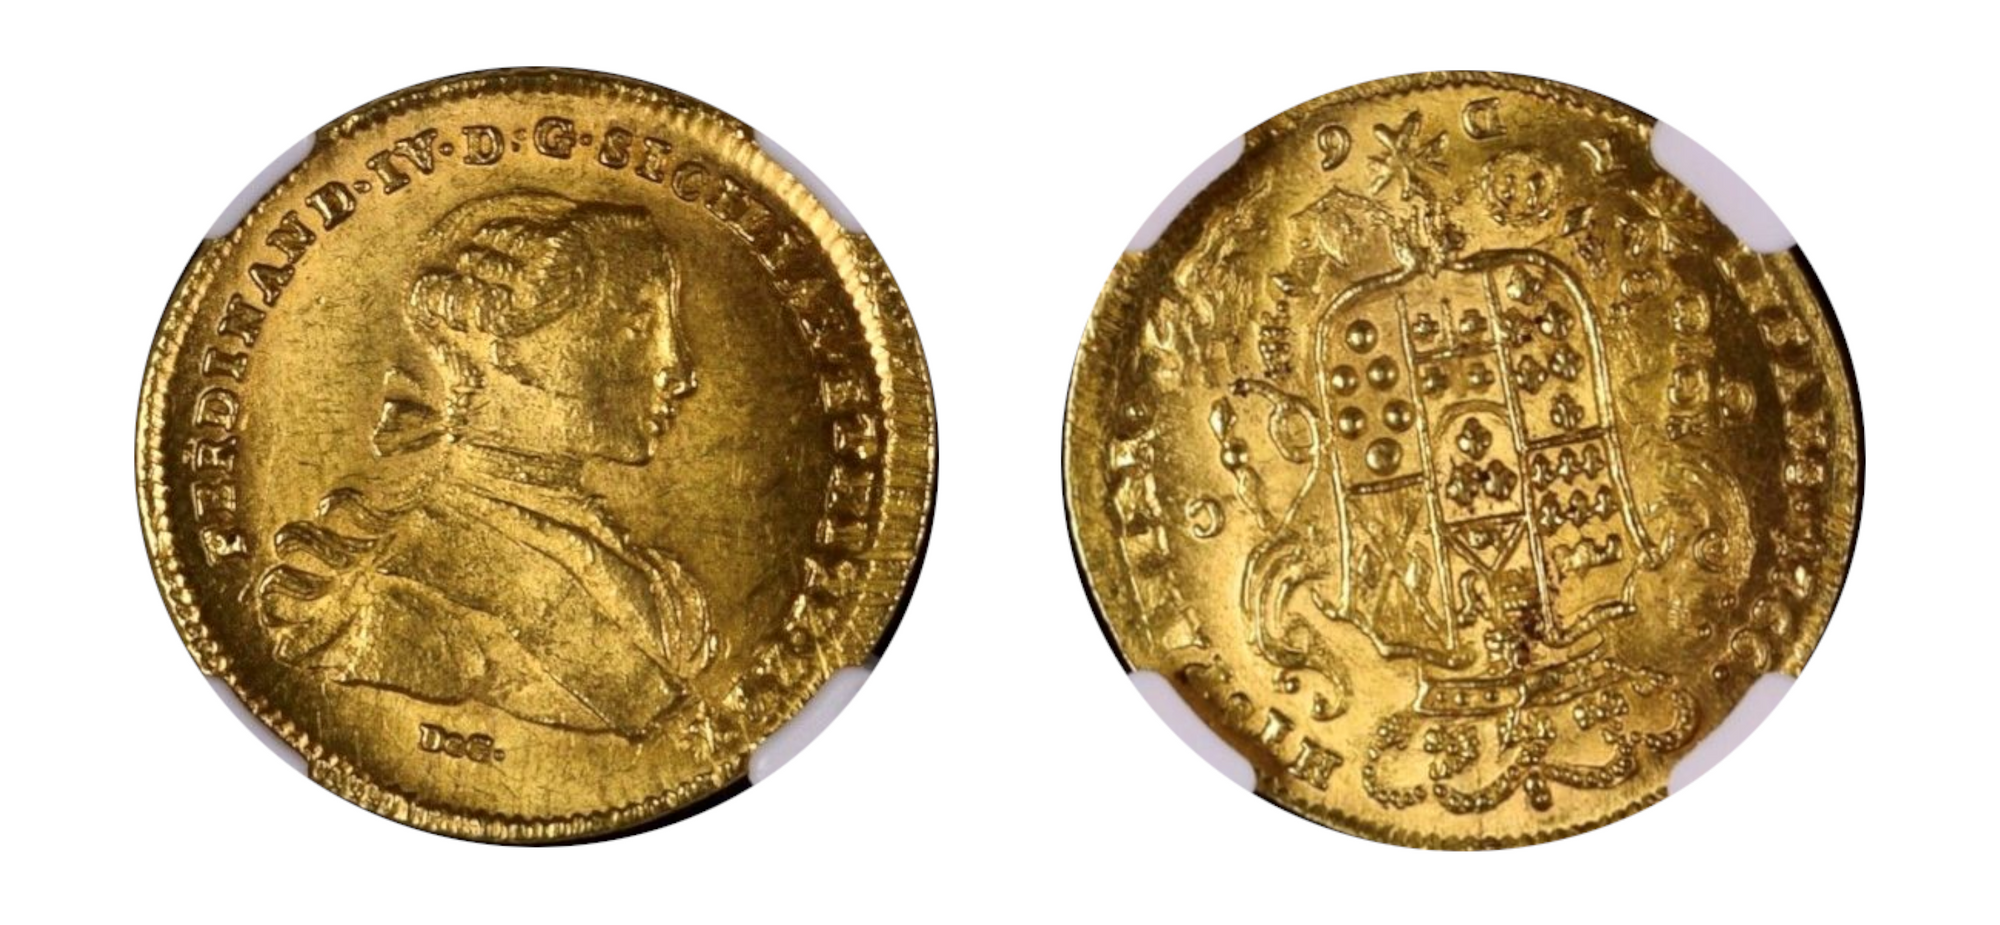 1766-Italy (Naples & Sicily) Gold 6 Ducats NGC MS 65+ LM - Hard Asset Management, Inc